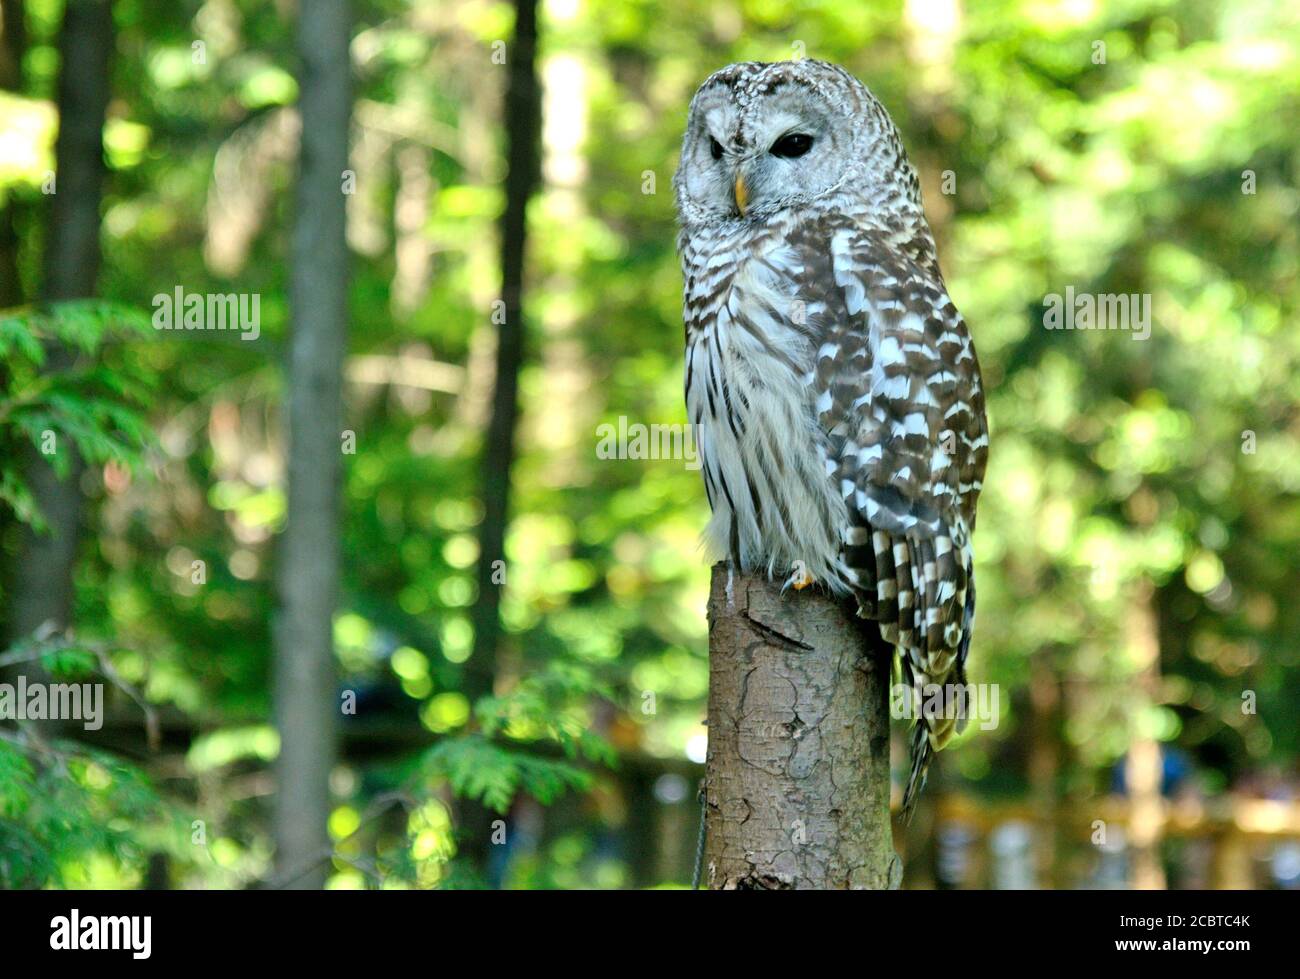 An image of a barred owl resting on a perch with a blurry background. Stock Photo